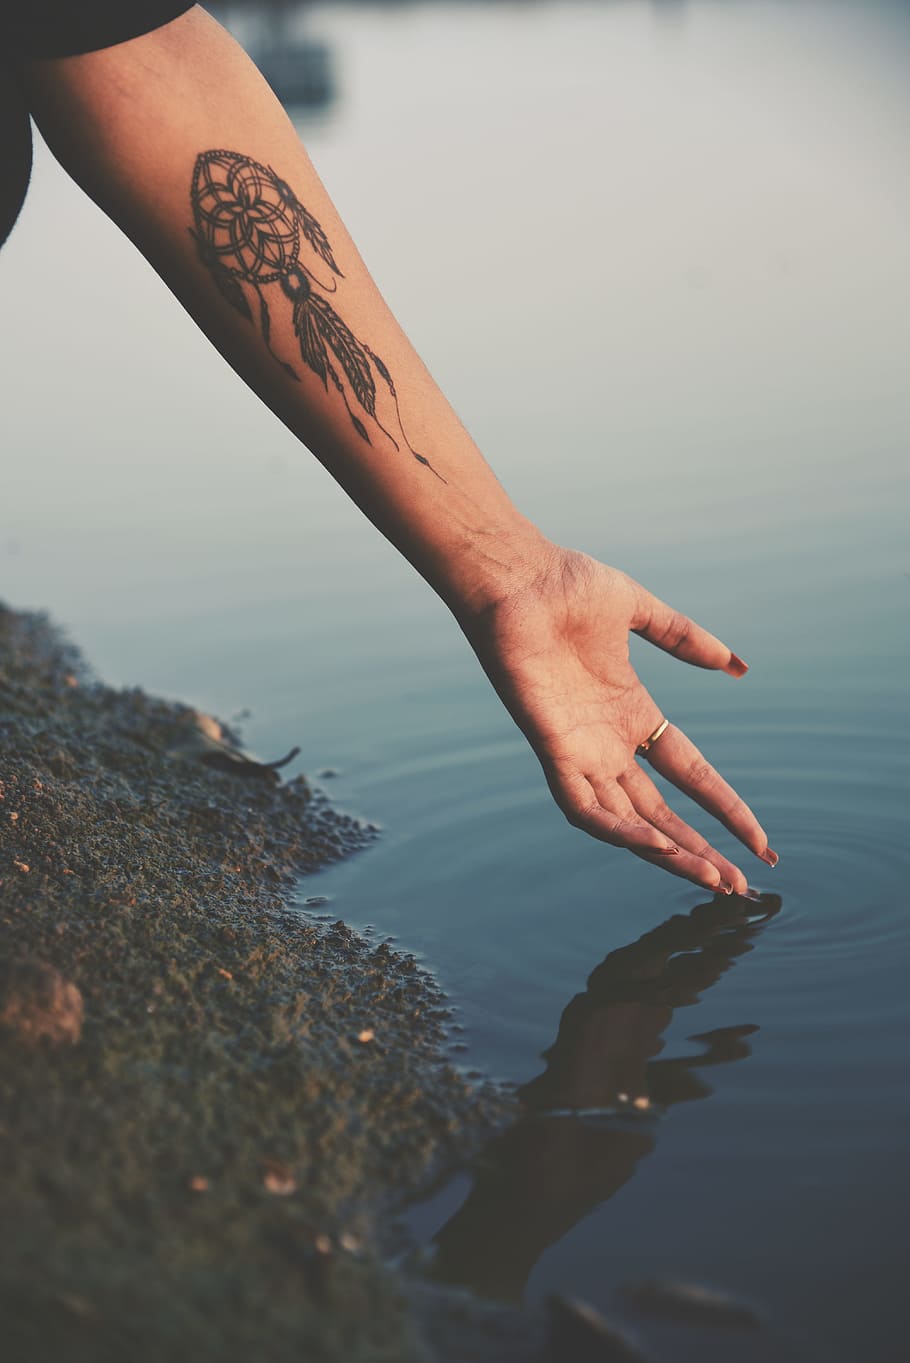 person hand reaching calm water with dreamcatcher tattoo, woman with dream catcher arm tattoo